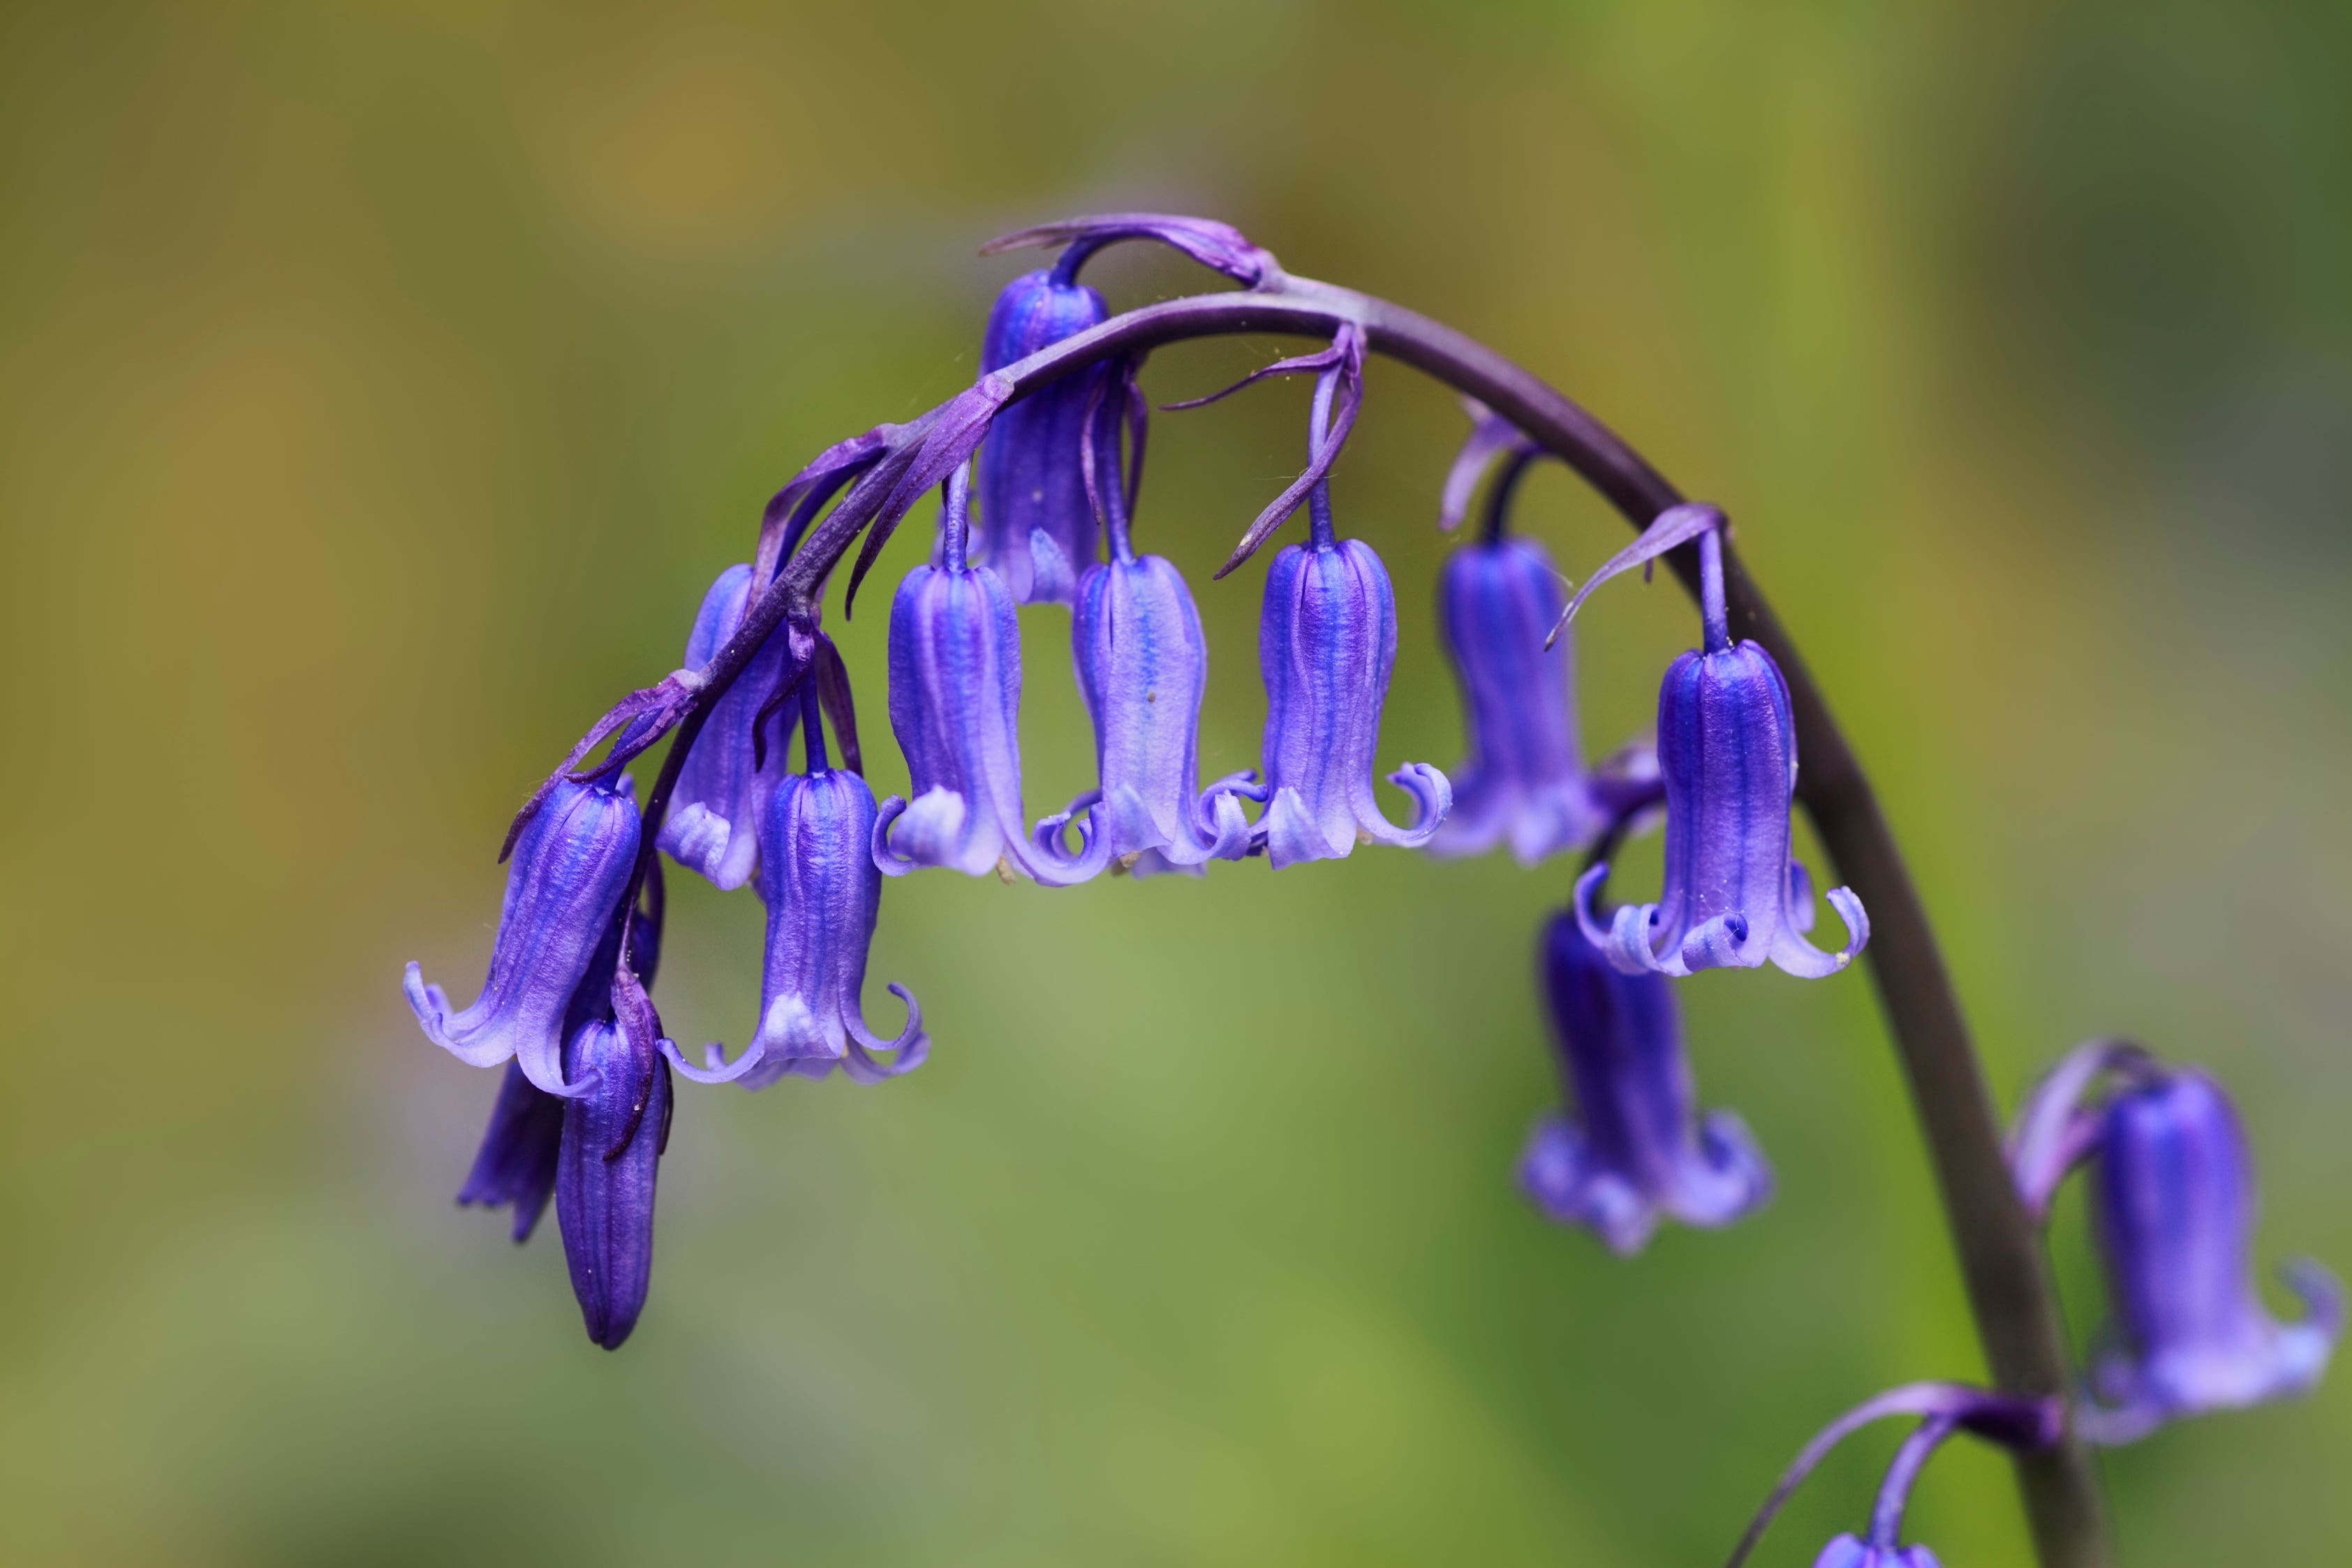 Why we should grow native bluebells